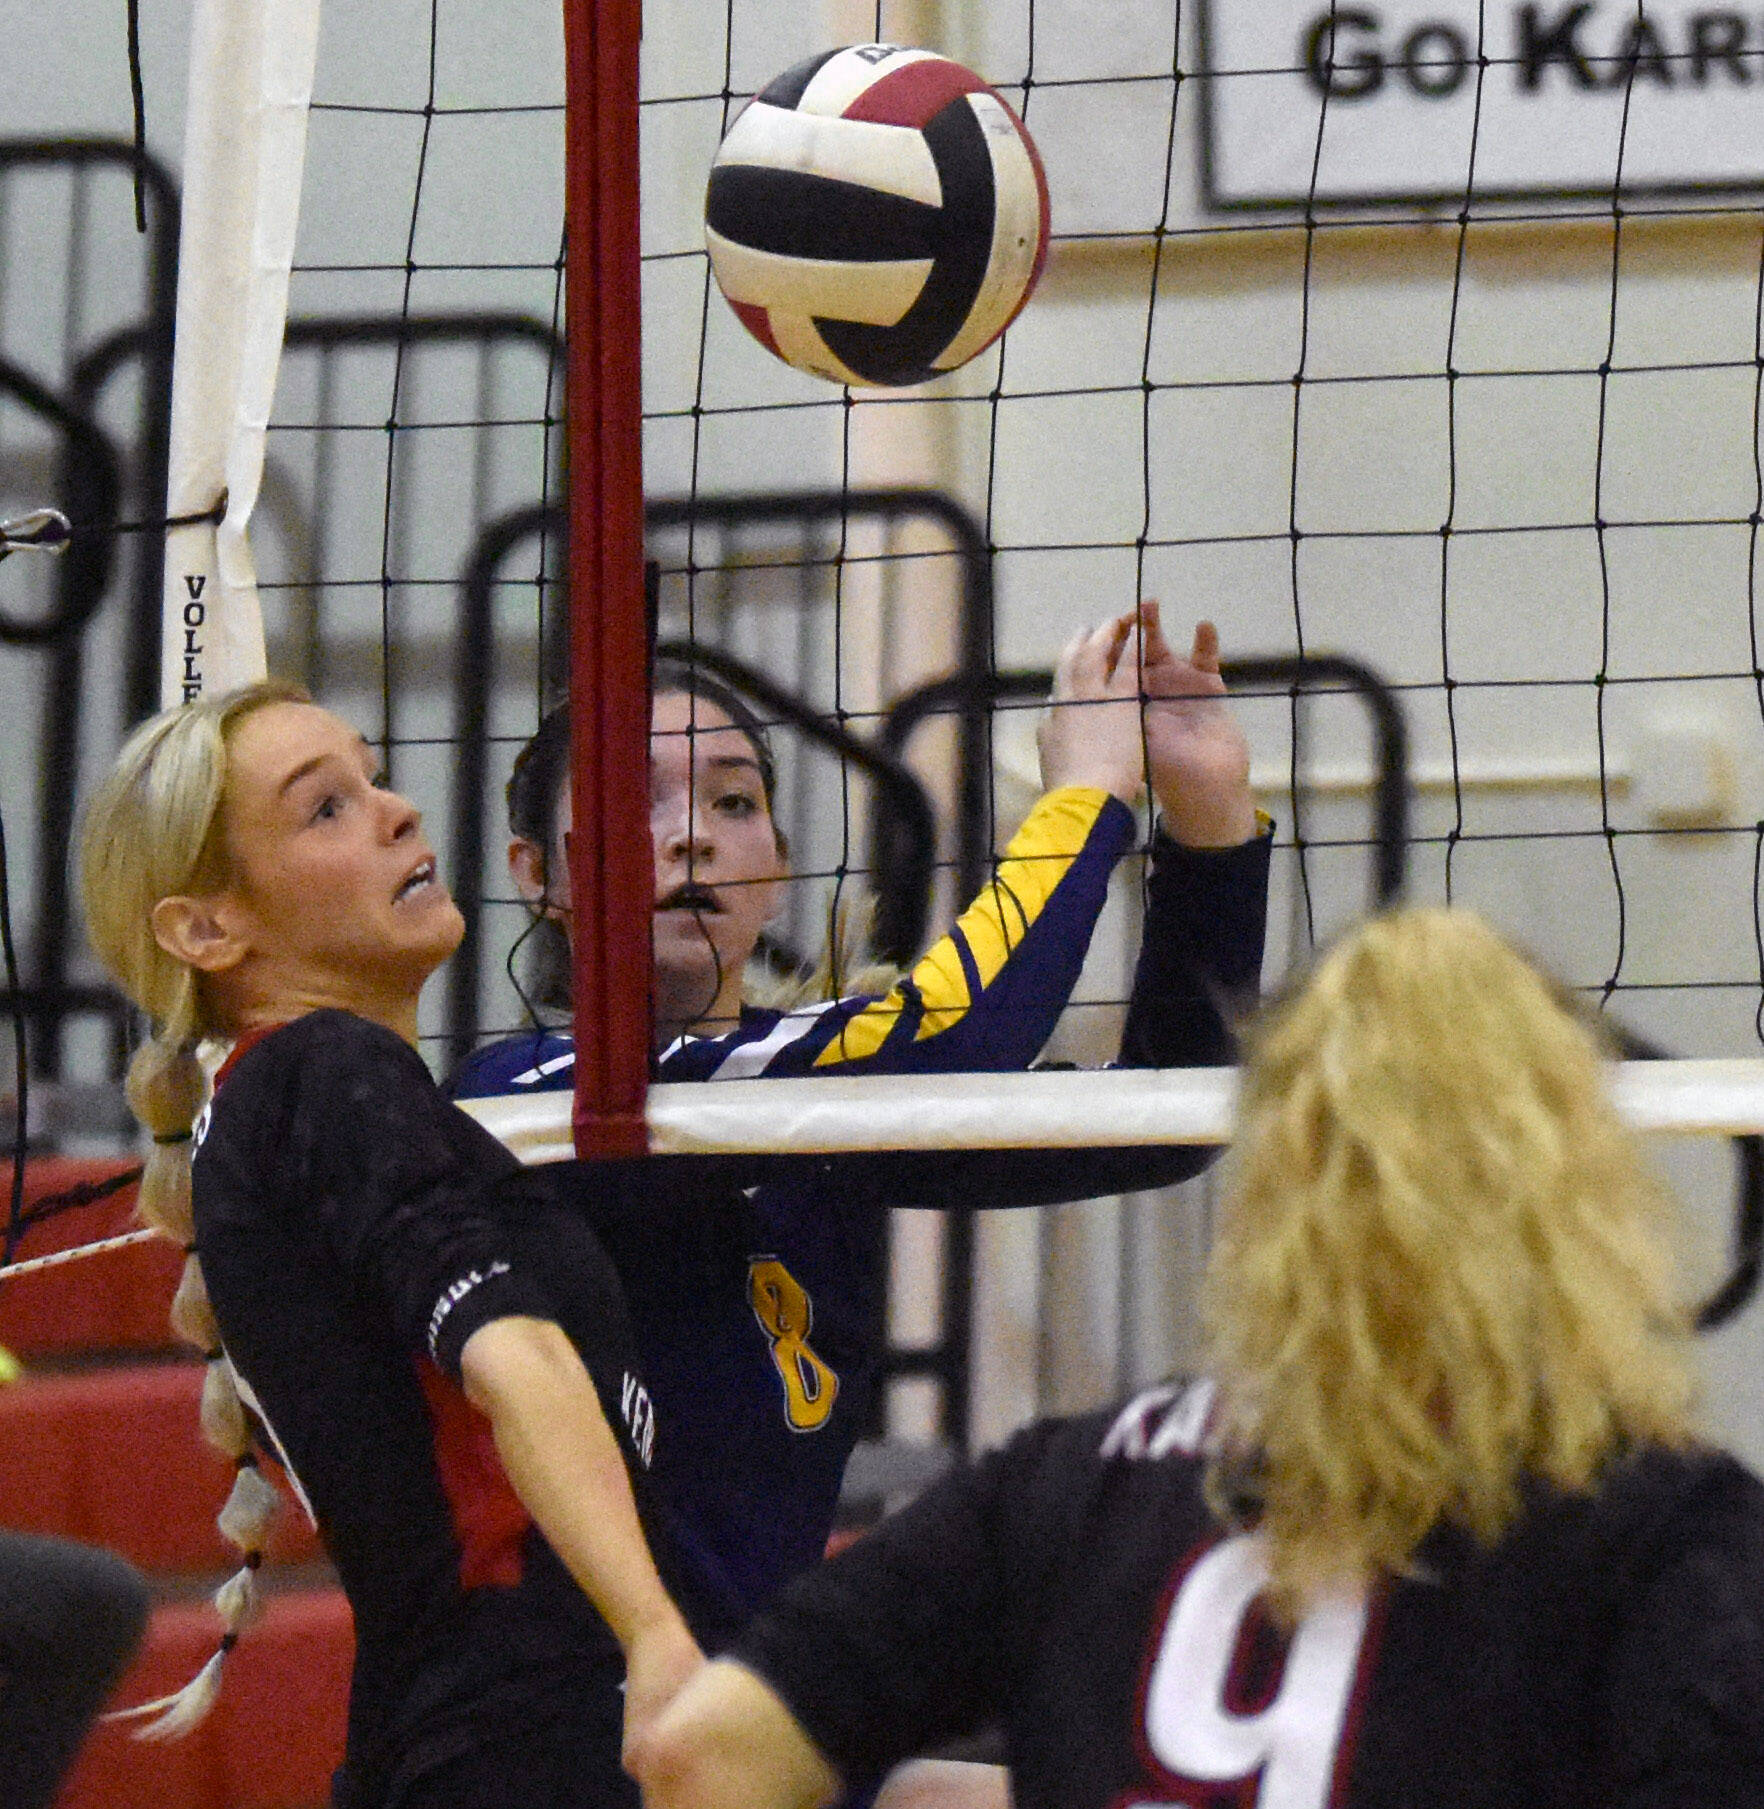 Kenai Central’s Cali Holmes keeps the ball alive in front of Homer’s Brooke Shafer on Friday, Sept. 9, 2022, at Kenai Central High School in Kenai, Alaska. (Photo by Jeff Helminiak/Peninsula Clarion)